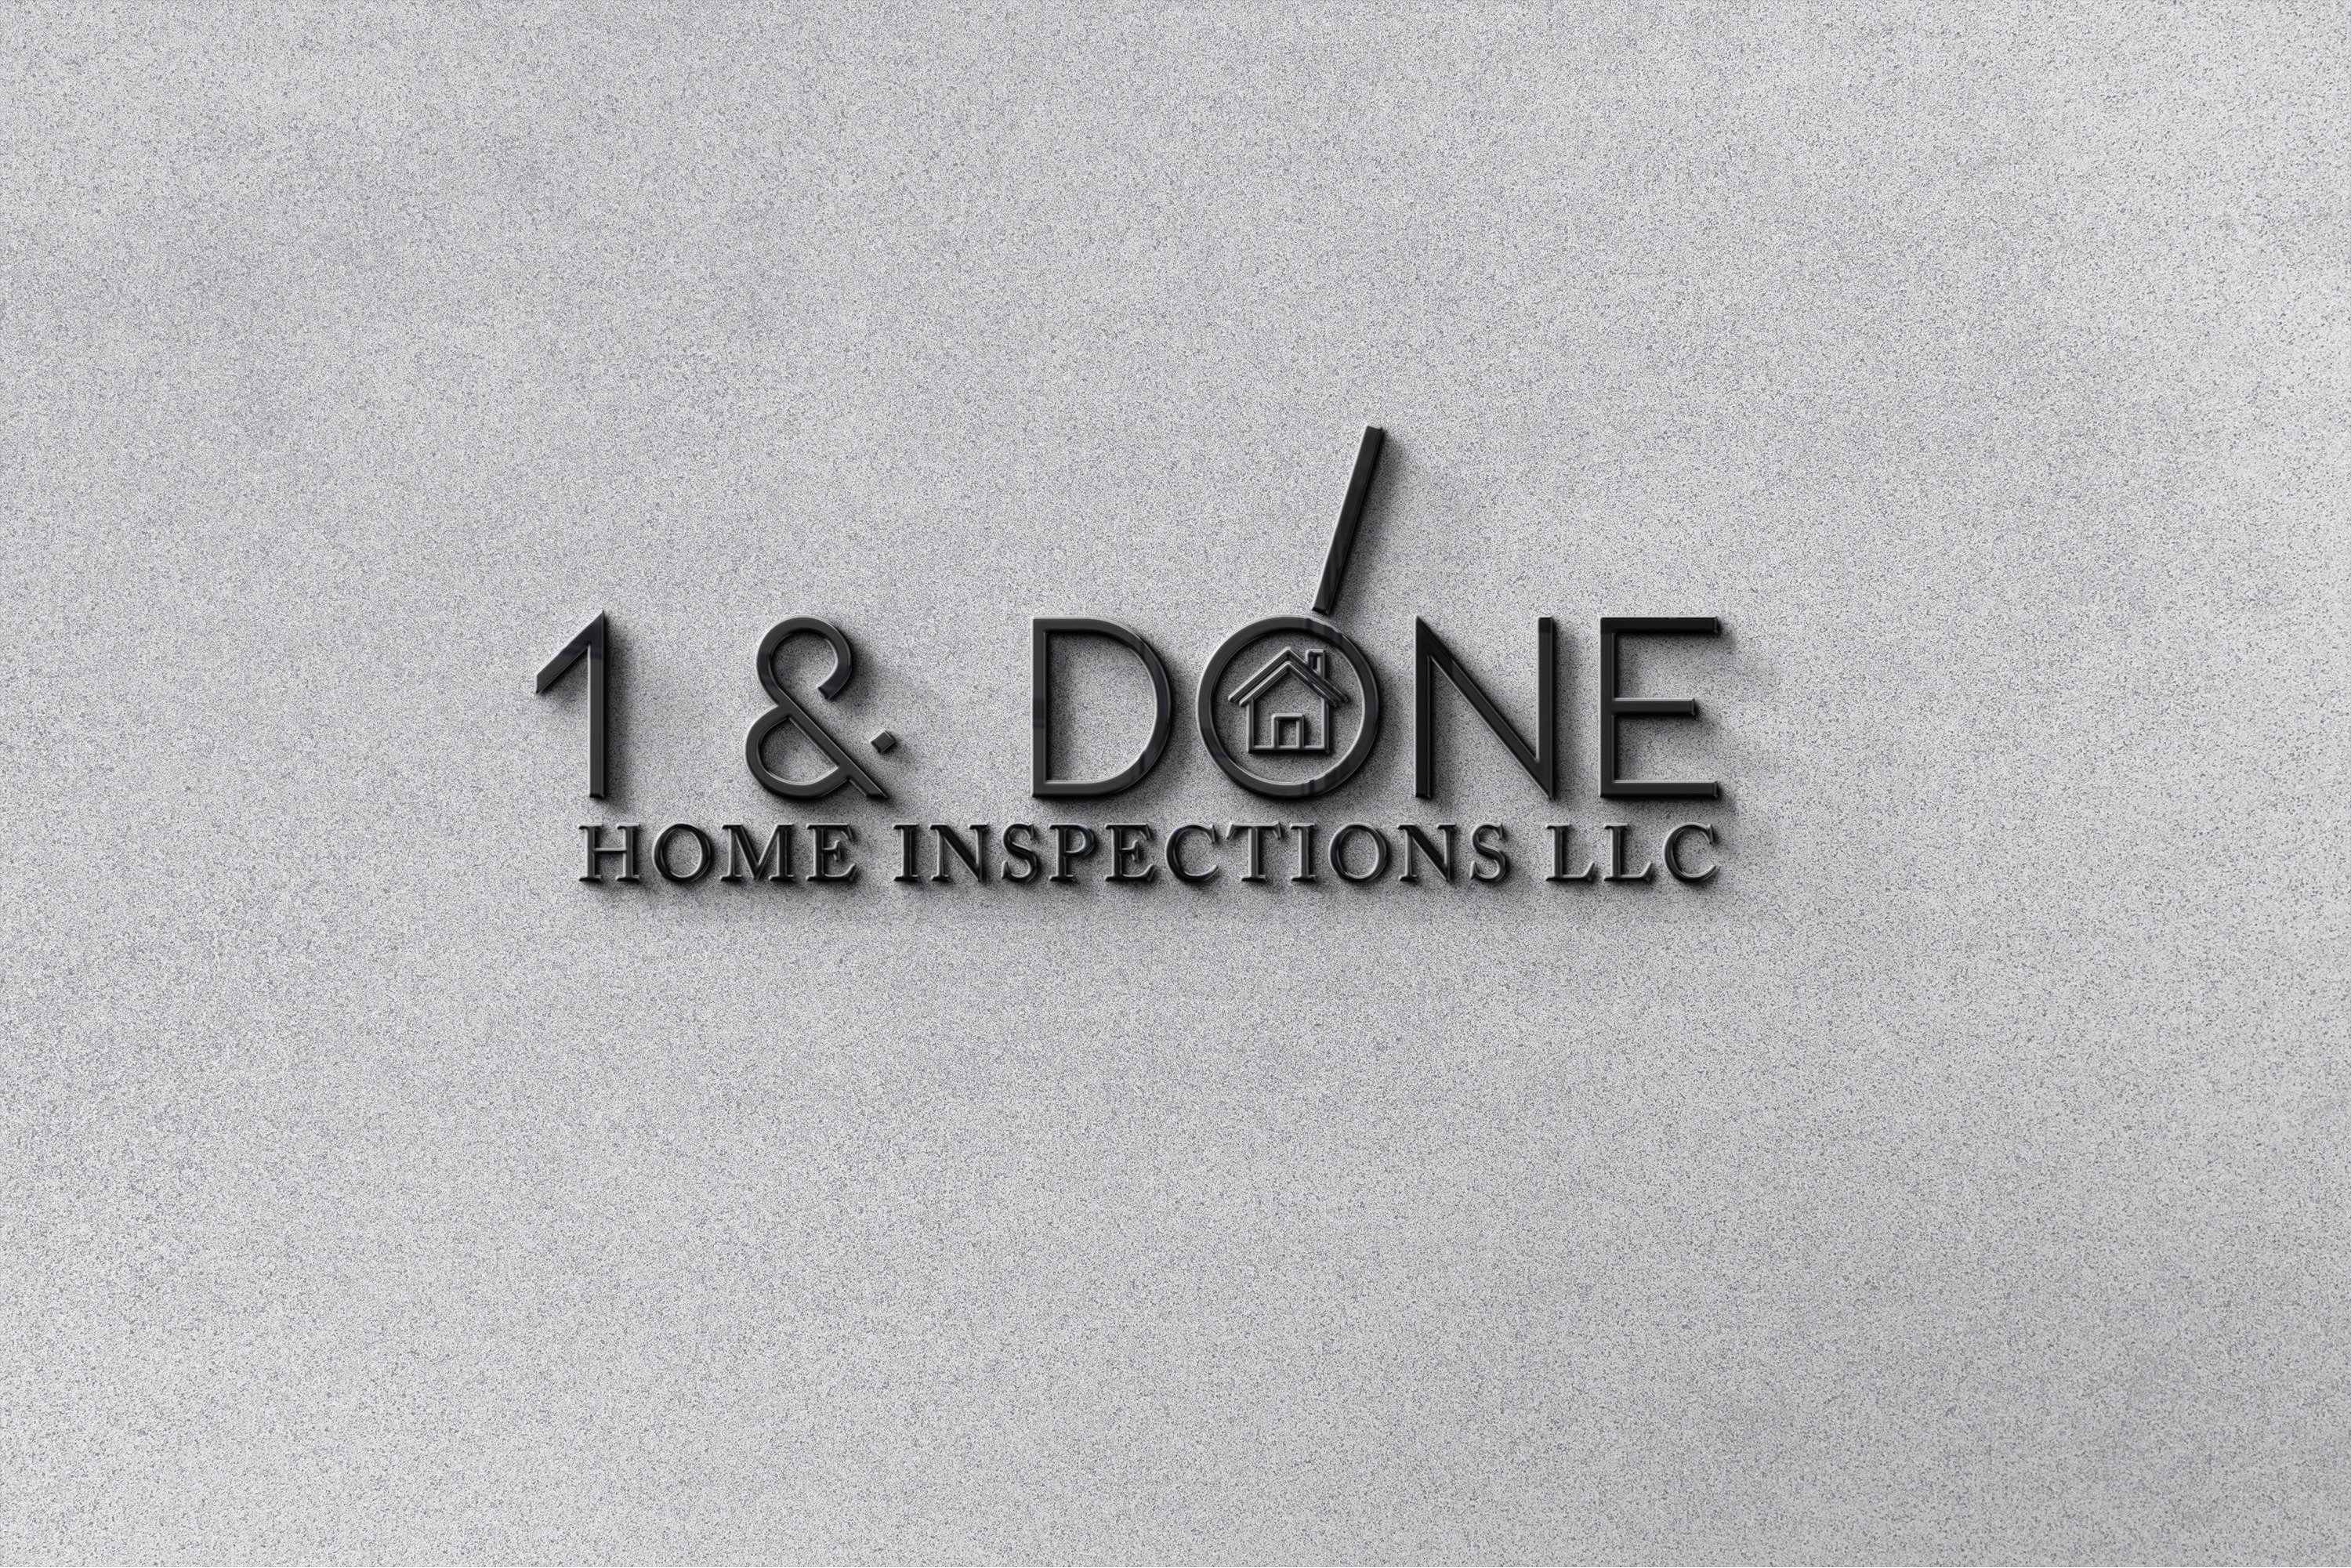 1 & Done Home Inspections LLC Logo